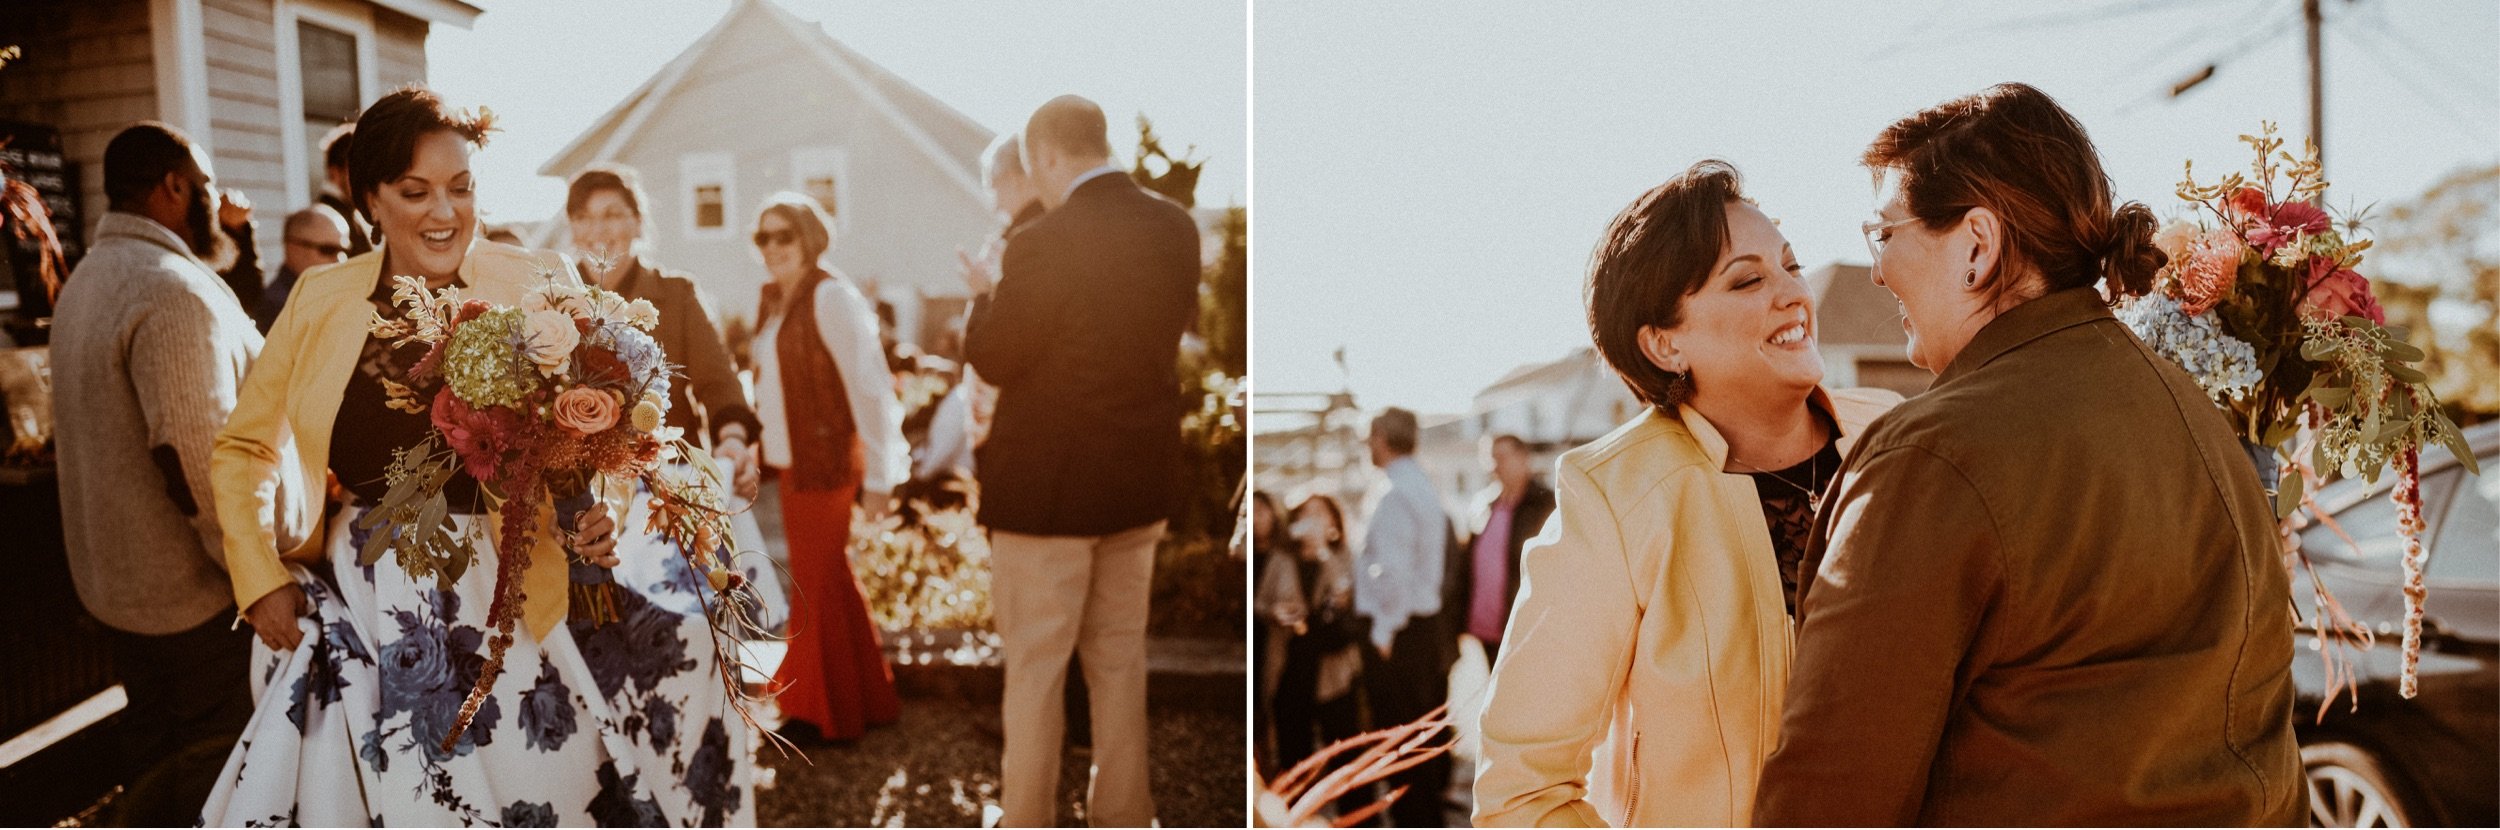 58_Colorful Intimate LGBTQ Wedding in Rockport MA - Vanessa Alves Photography.jpg